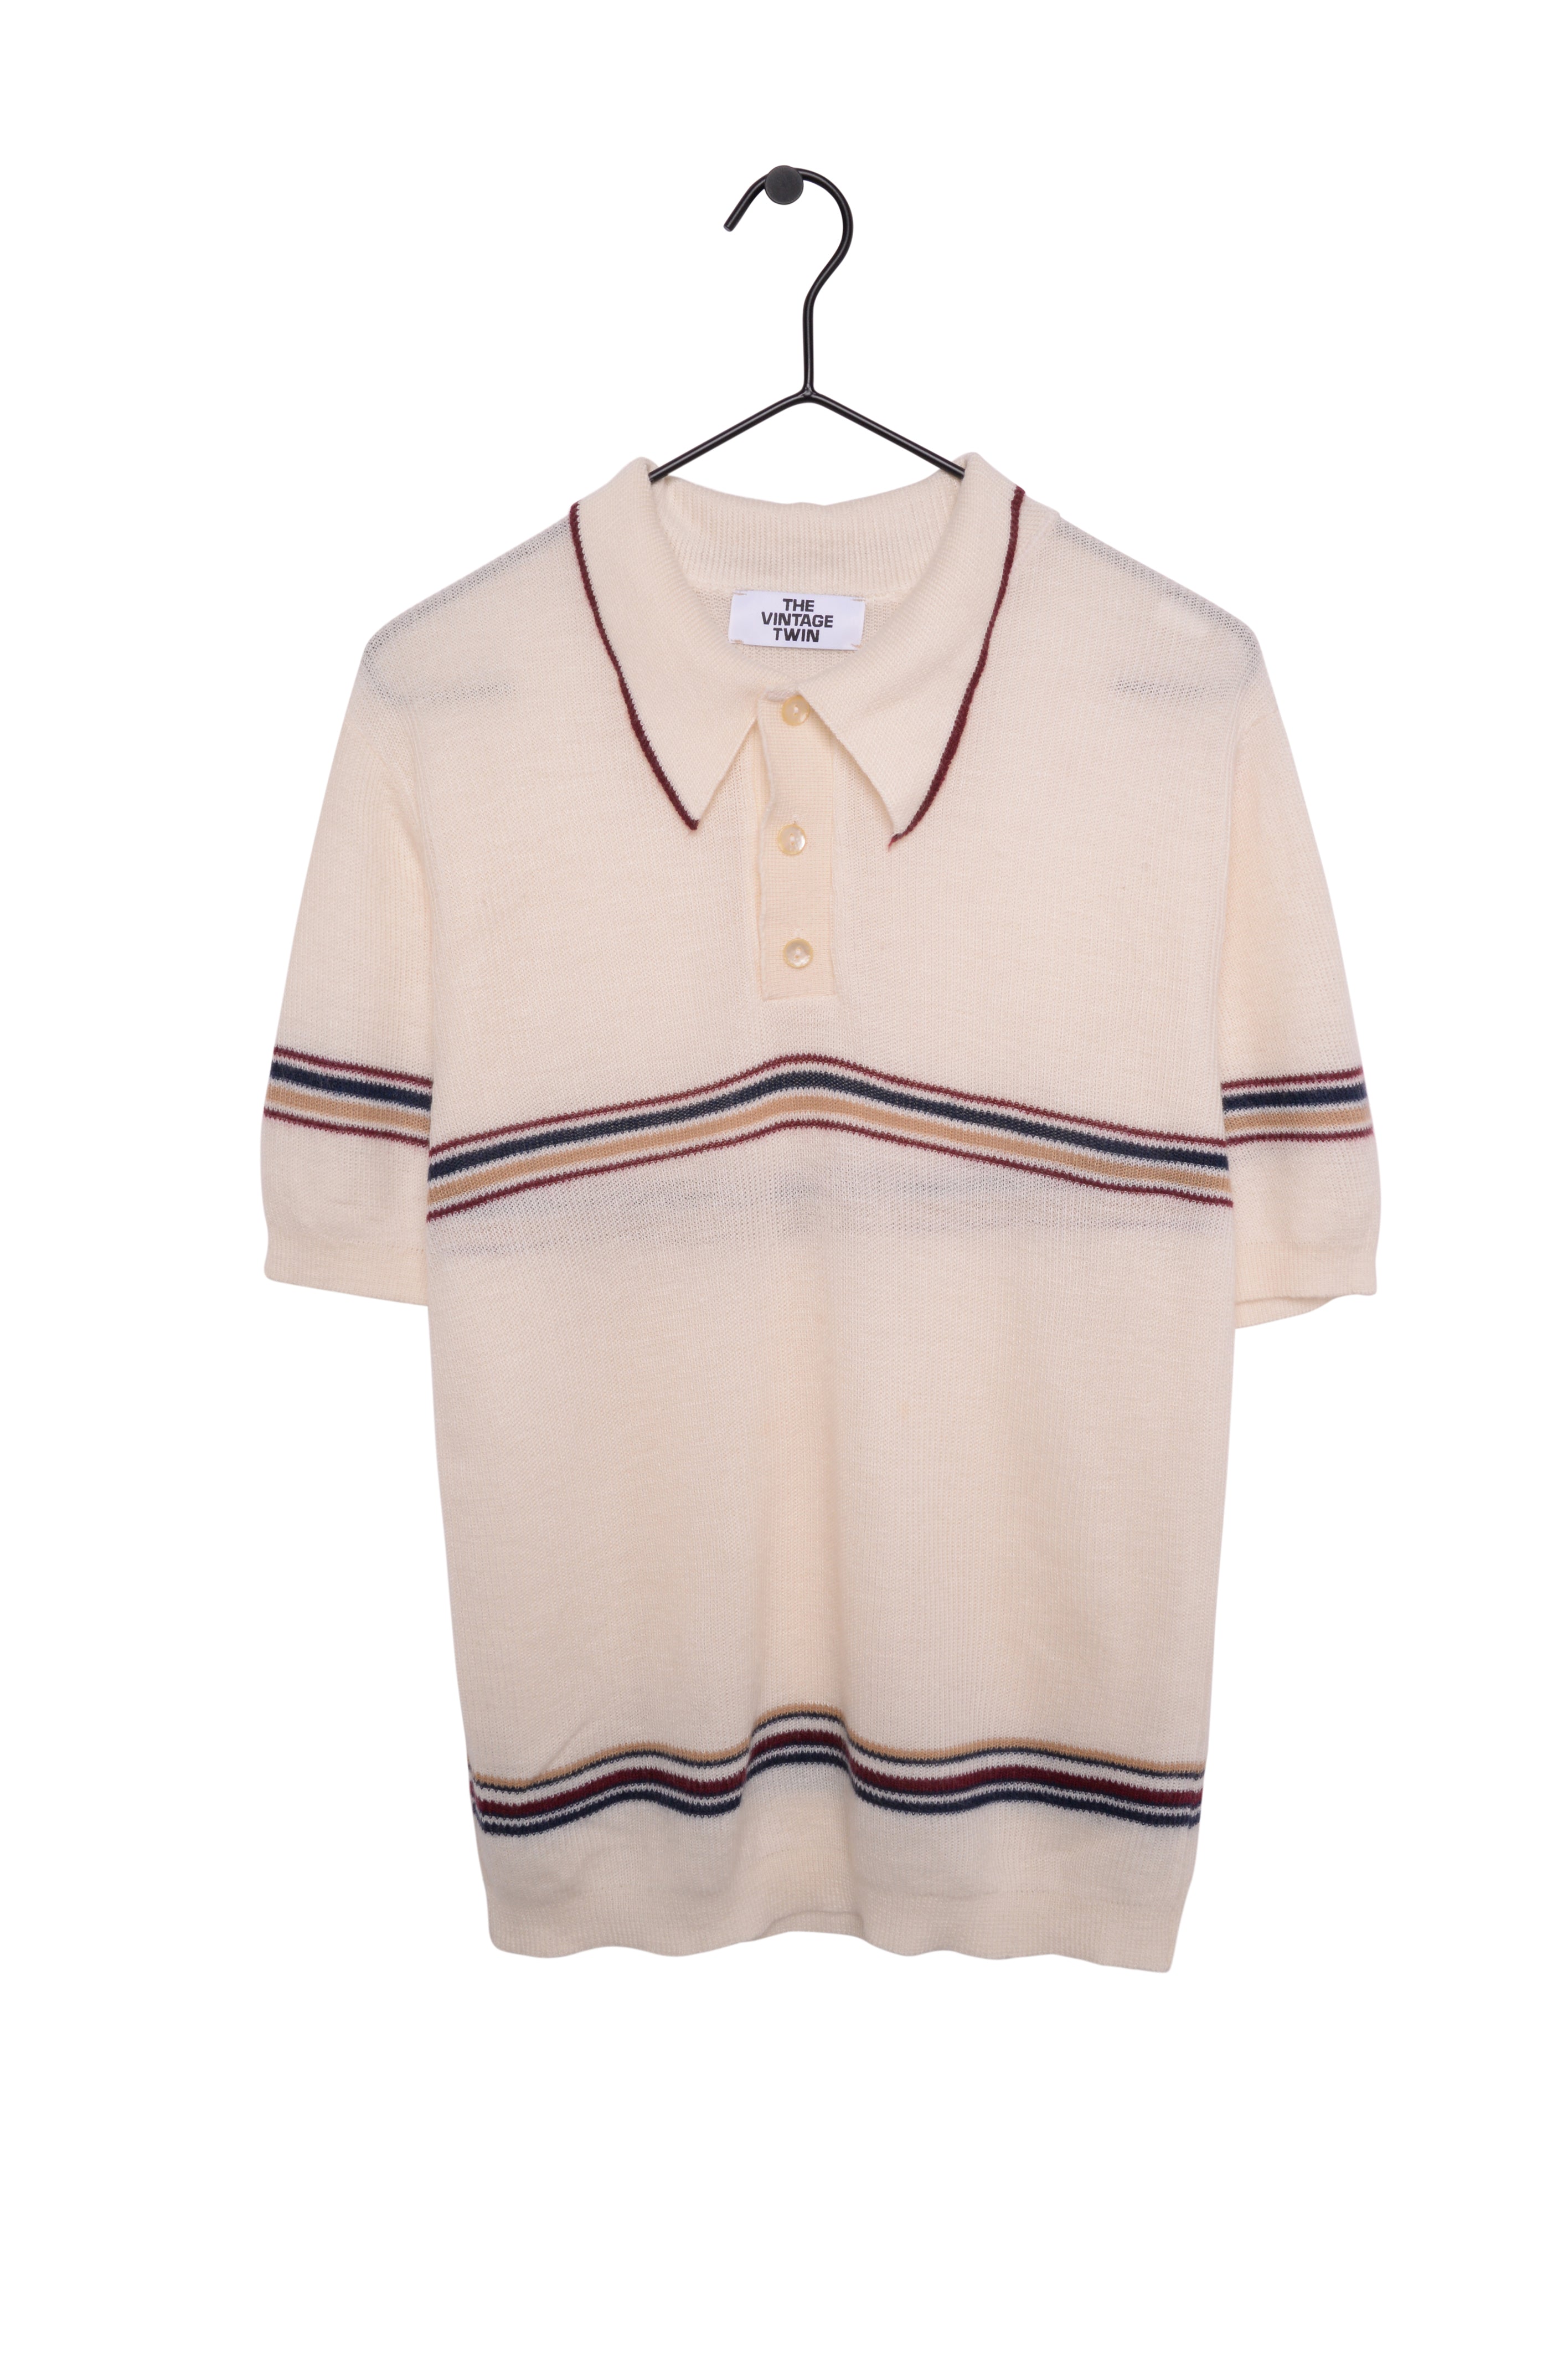 1970s Soft Knit Polo Free Shipping - The Vintage Twin